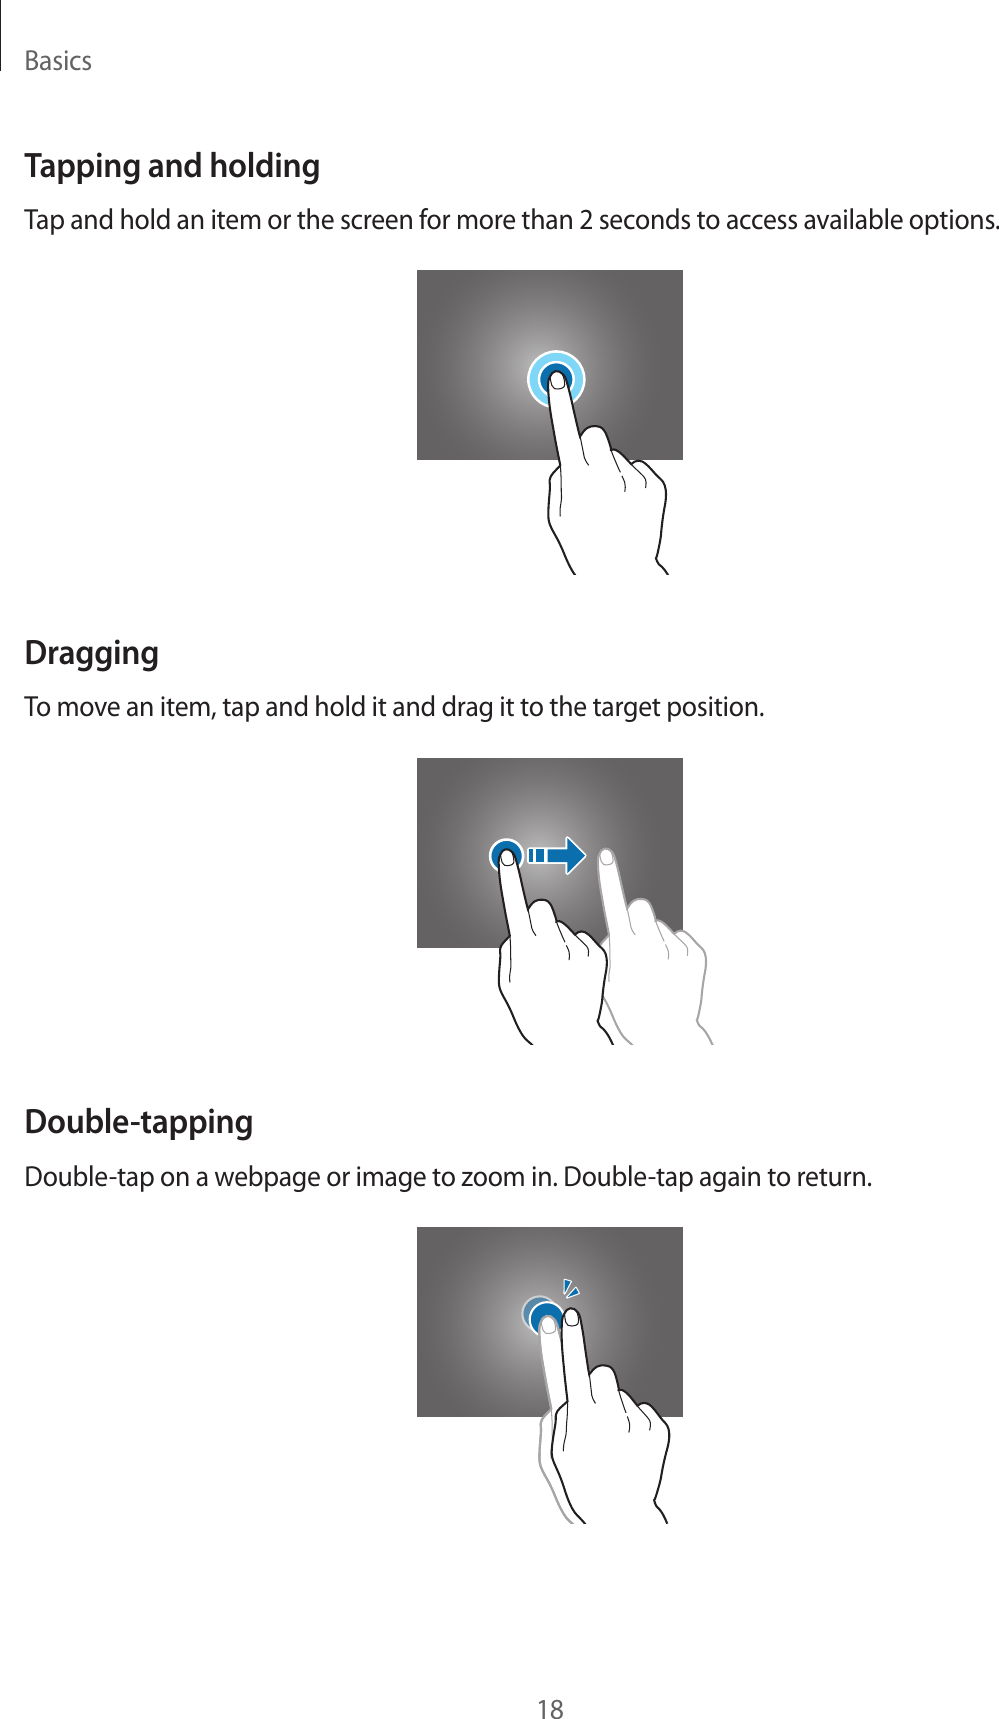 Basics18Tapping and holdingTap and hold an item or the screen for more than 2 seconds to access available options.DraggingTo move an item, tap and hold it and drag it to the target position.Double-tappingDouble-tap on a webpage or image to zoom in. Double-tap again to return.